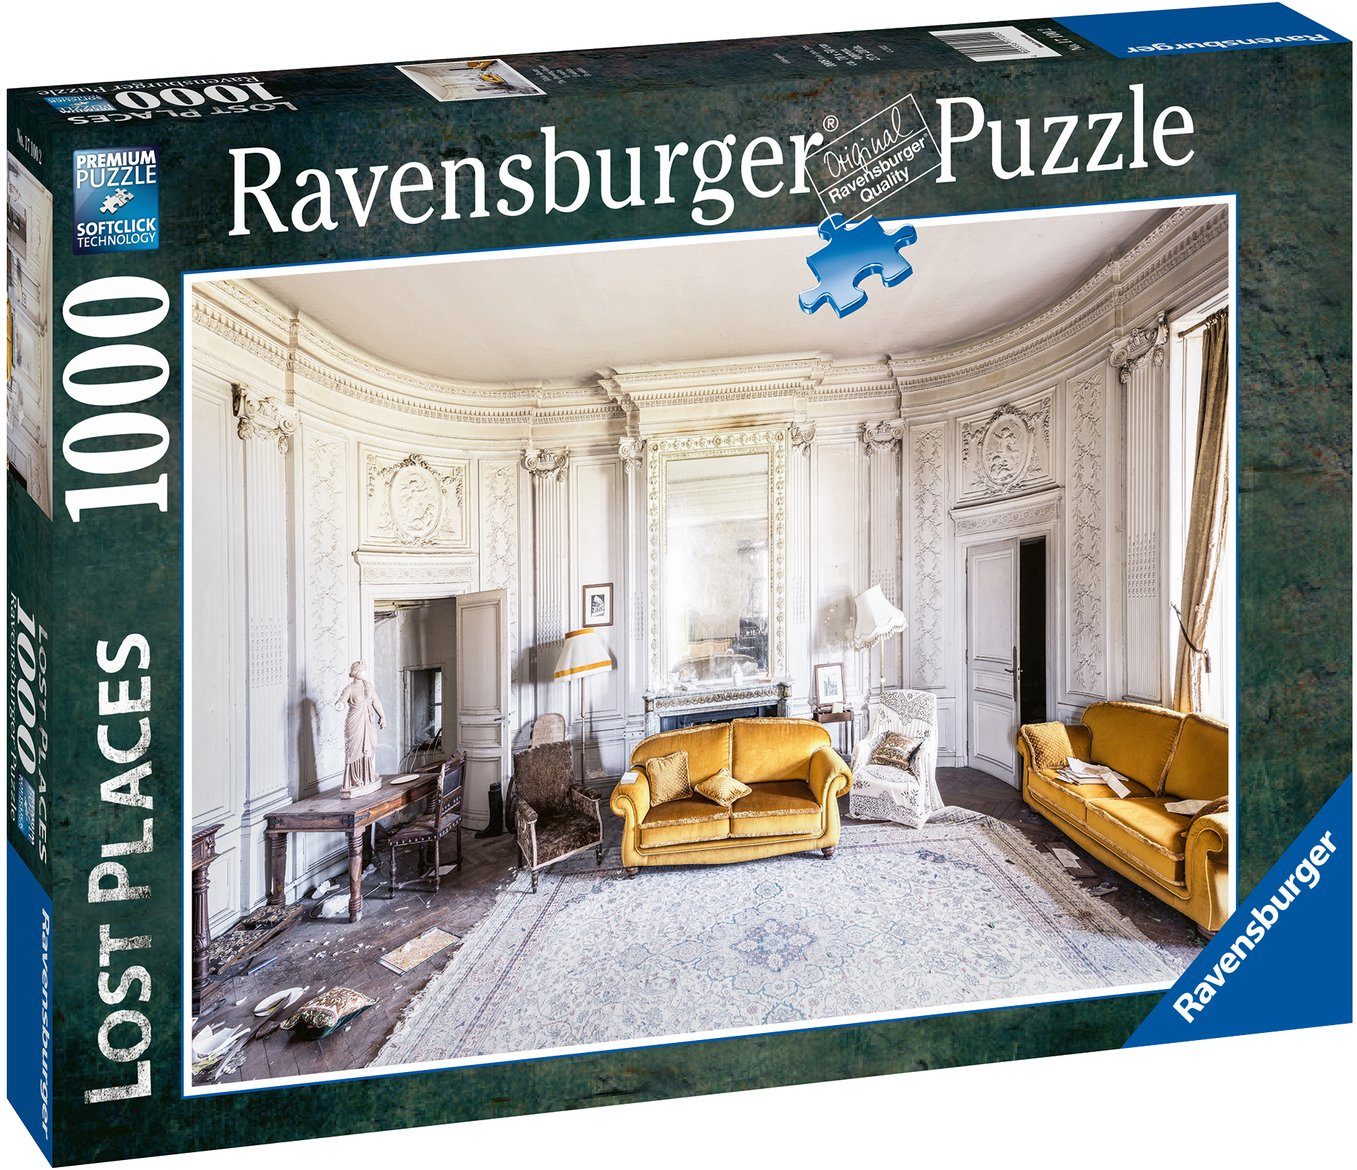 - Room, 1000 White schützt Puzzle Ravensburger FSC® Wald in Germany, Made Places, - Puzzleteile, Lost weltweit